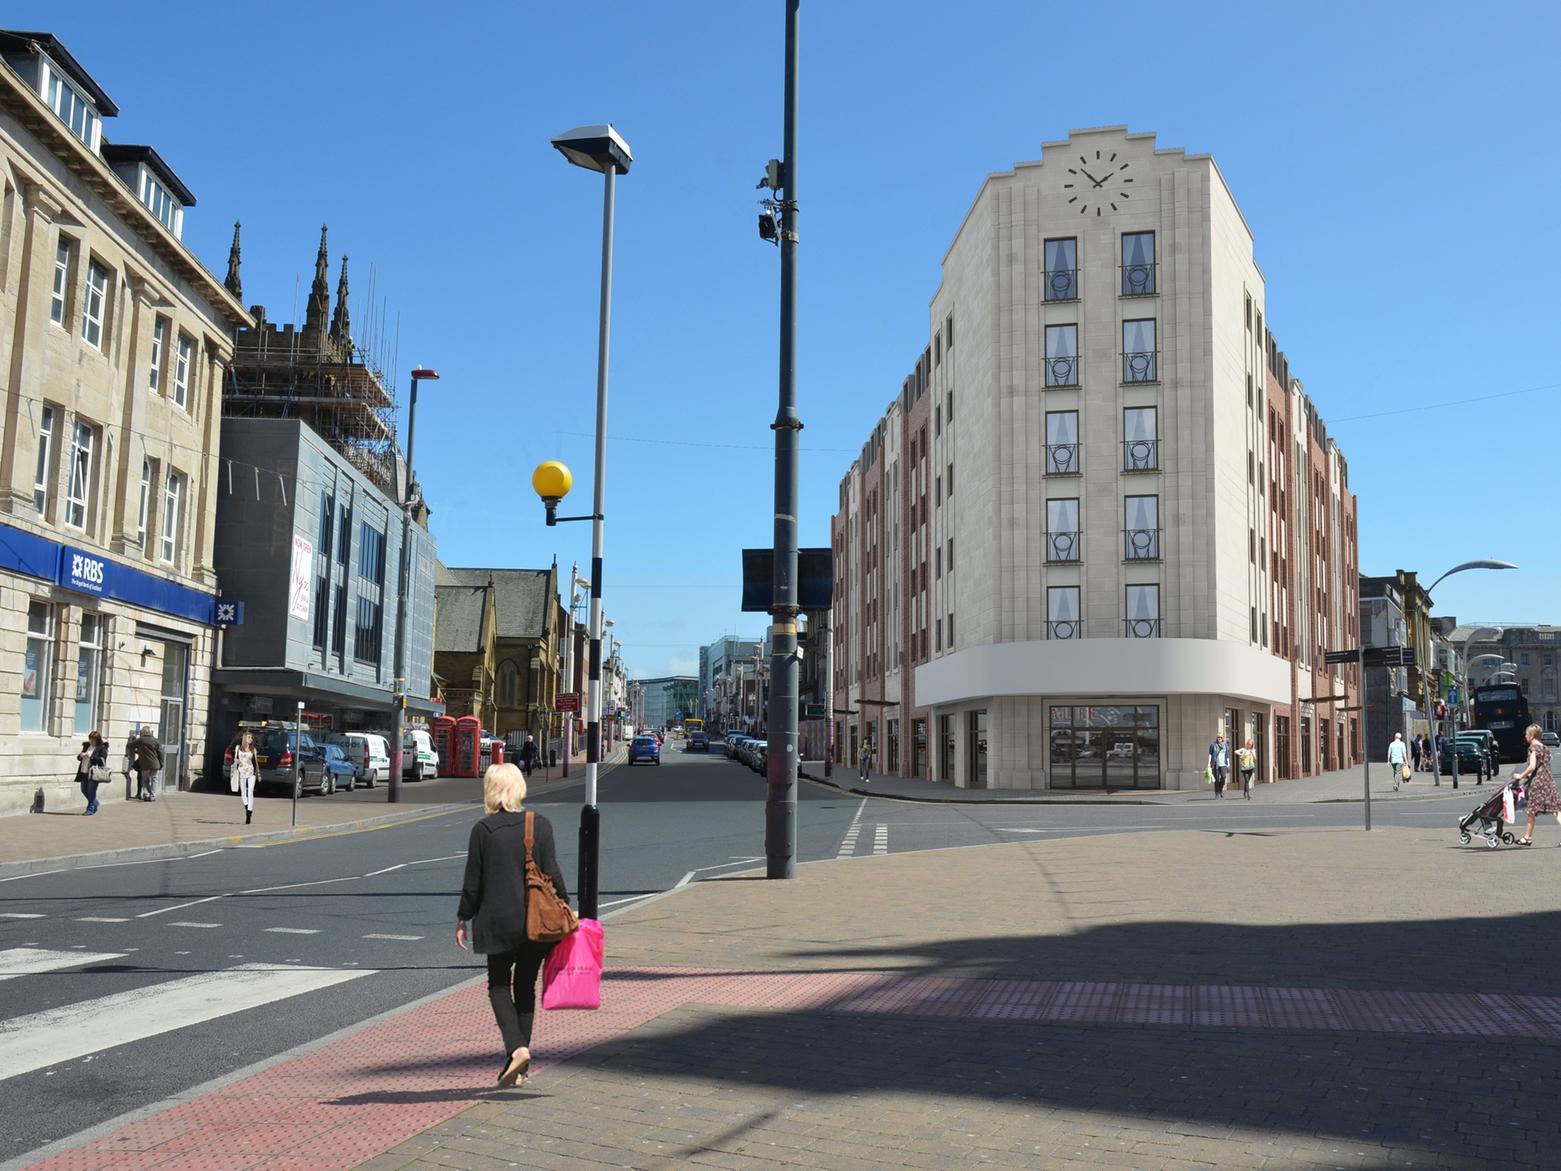 In 2009 Blackpool's famous Yates's Wine Lodge was lost to fire. After a number of year's empty construction began for a new Premier Inn hotel at the site began in 2018. The hotel is set to open during spring 2020.